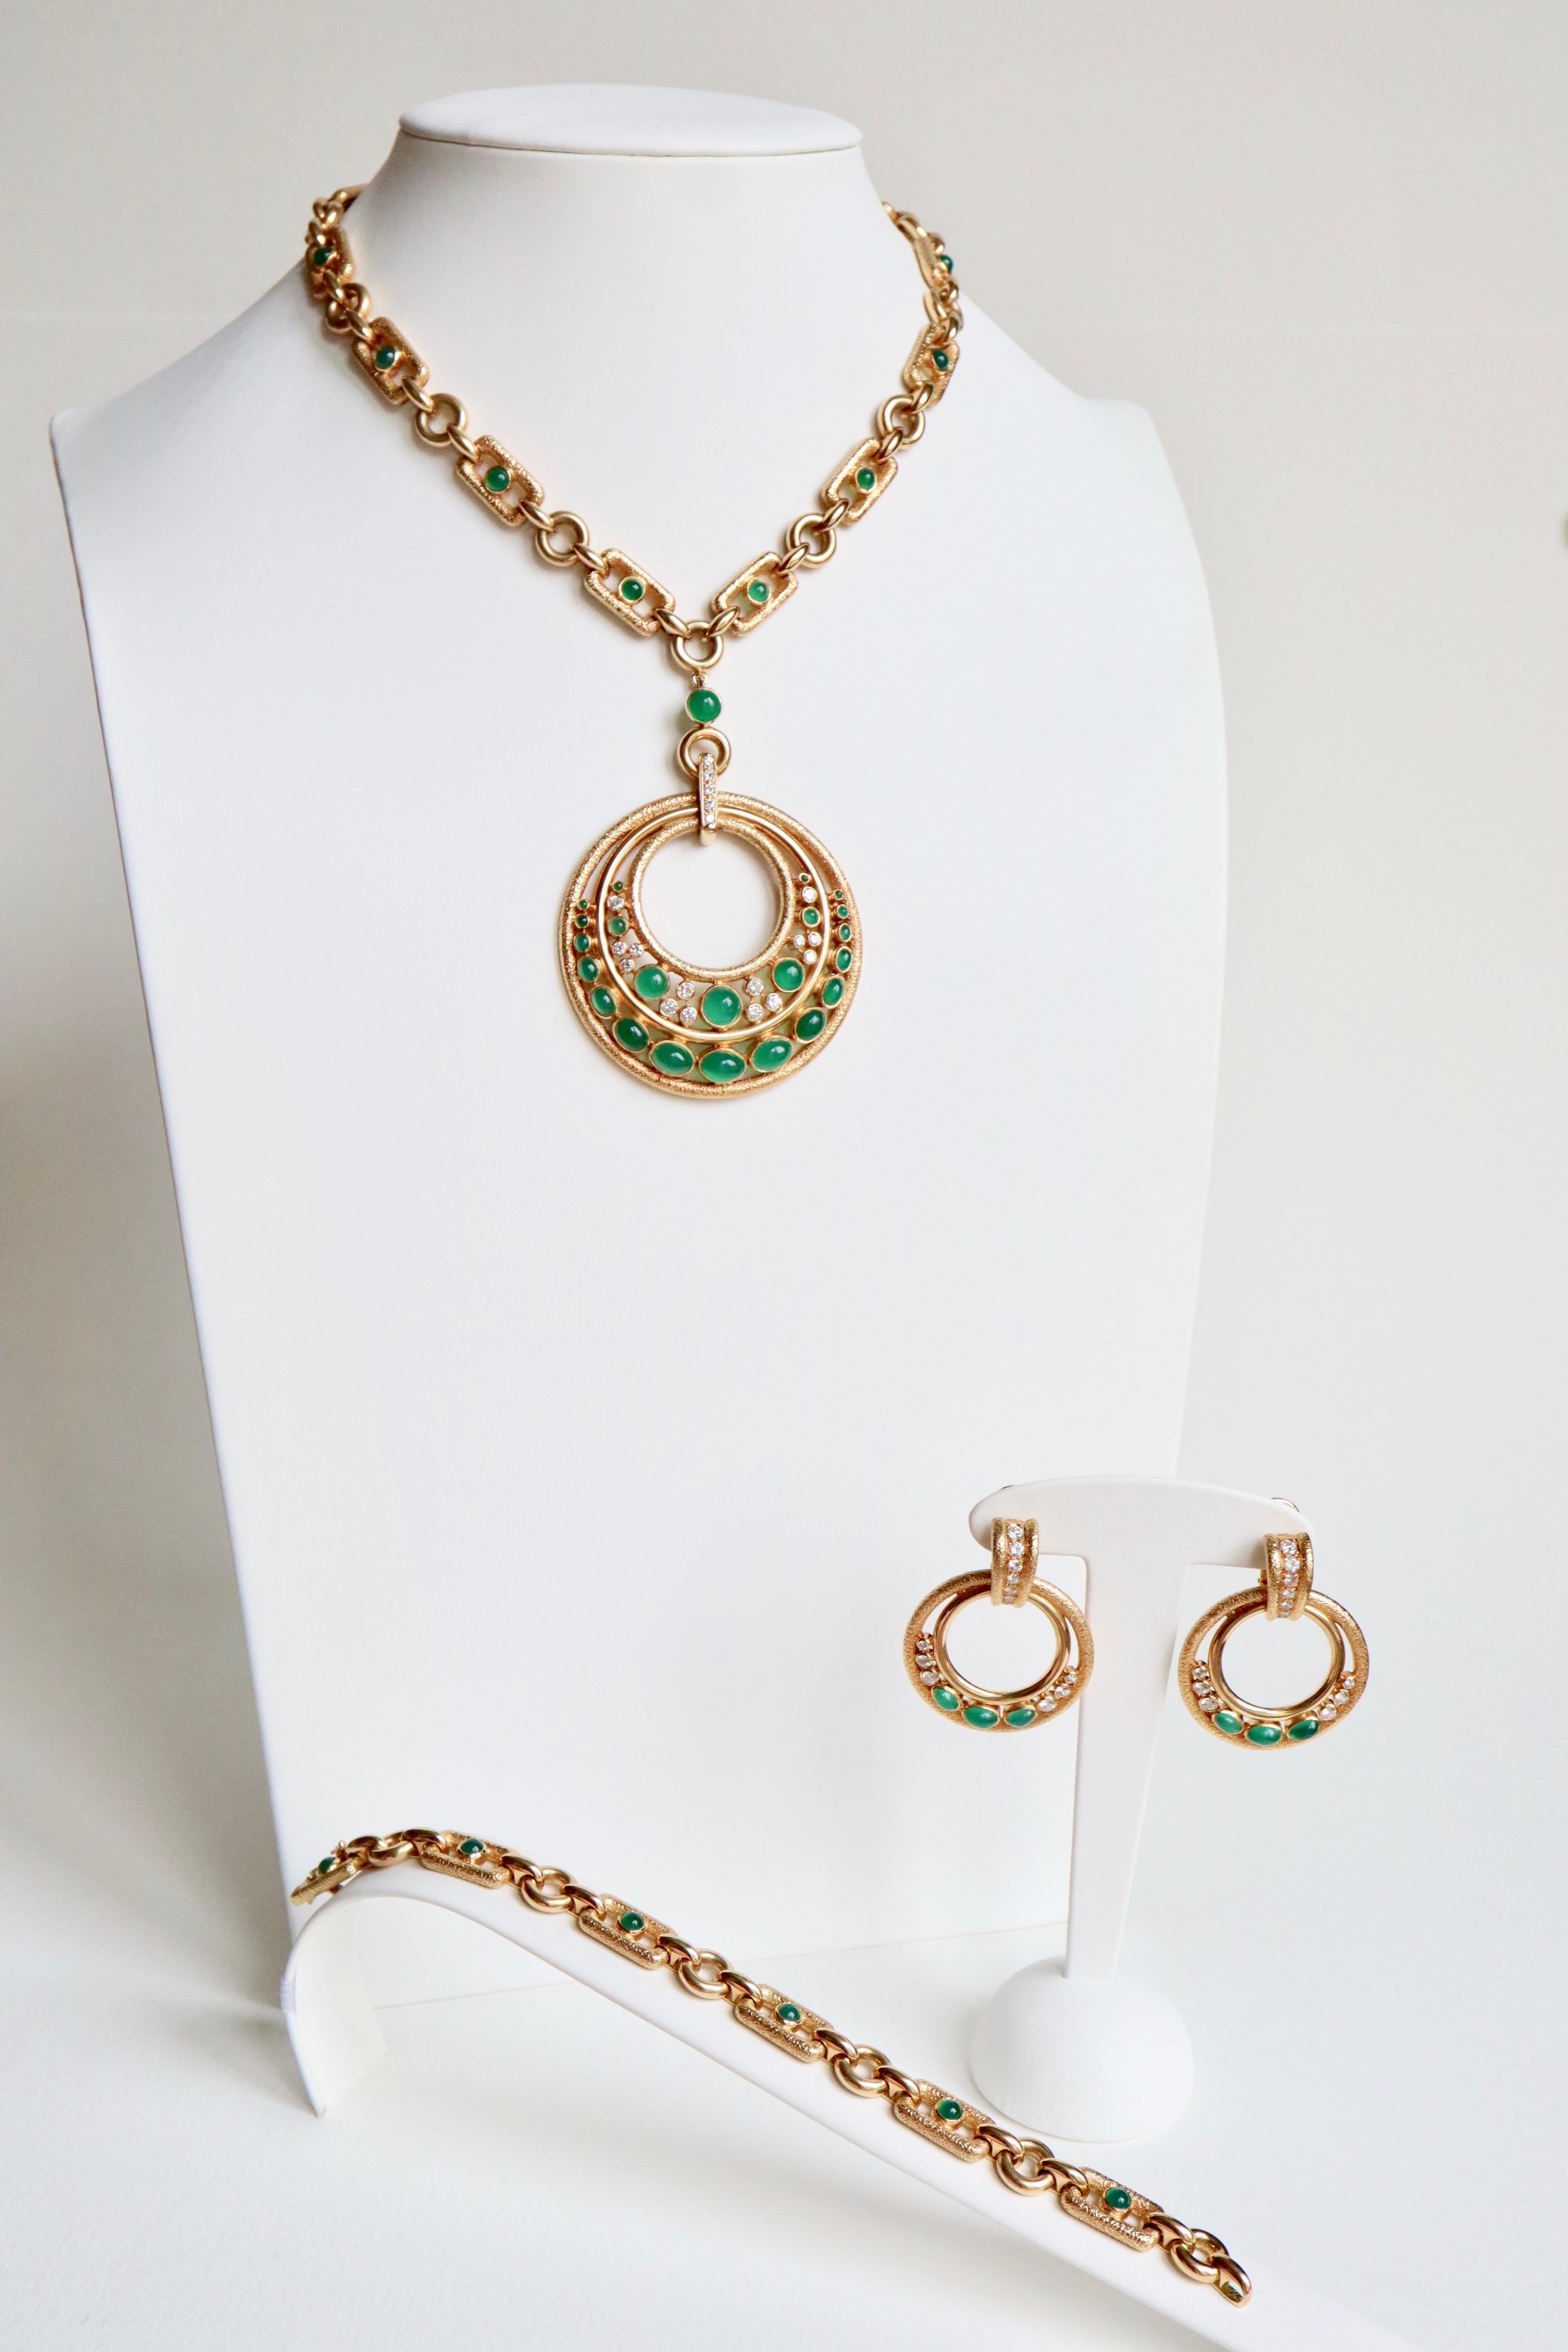 Contemporary Mauboussin Necklace and Earrings Gold, Diamonds and Chrysoprase Transformable